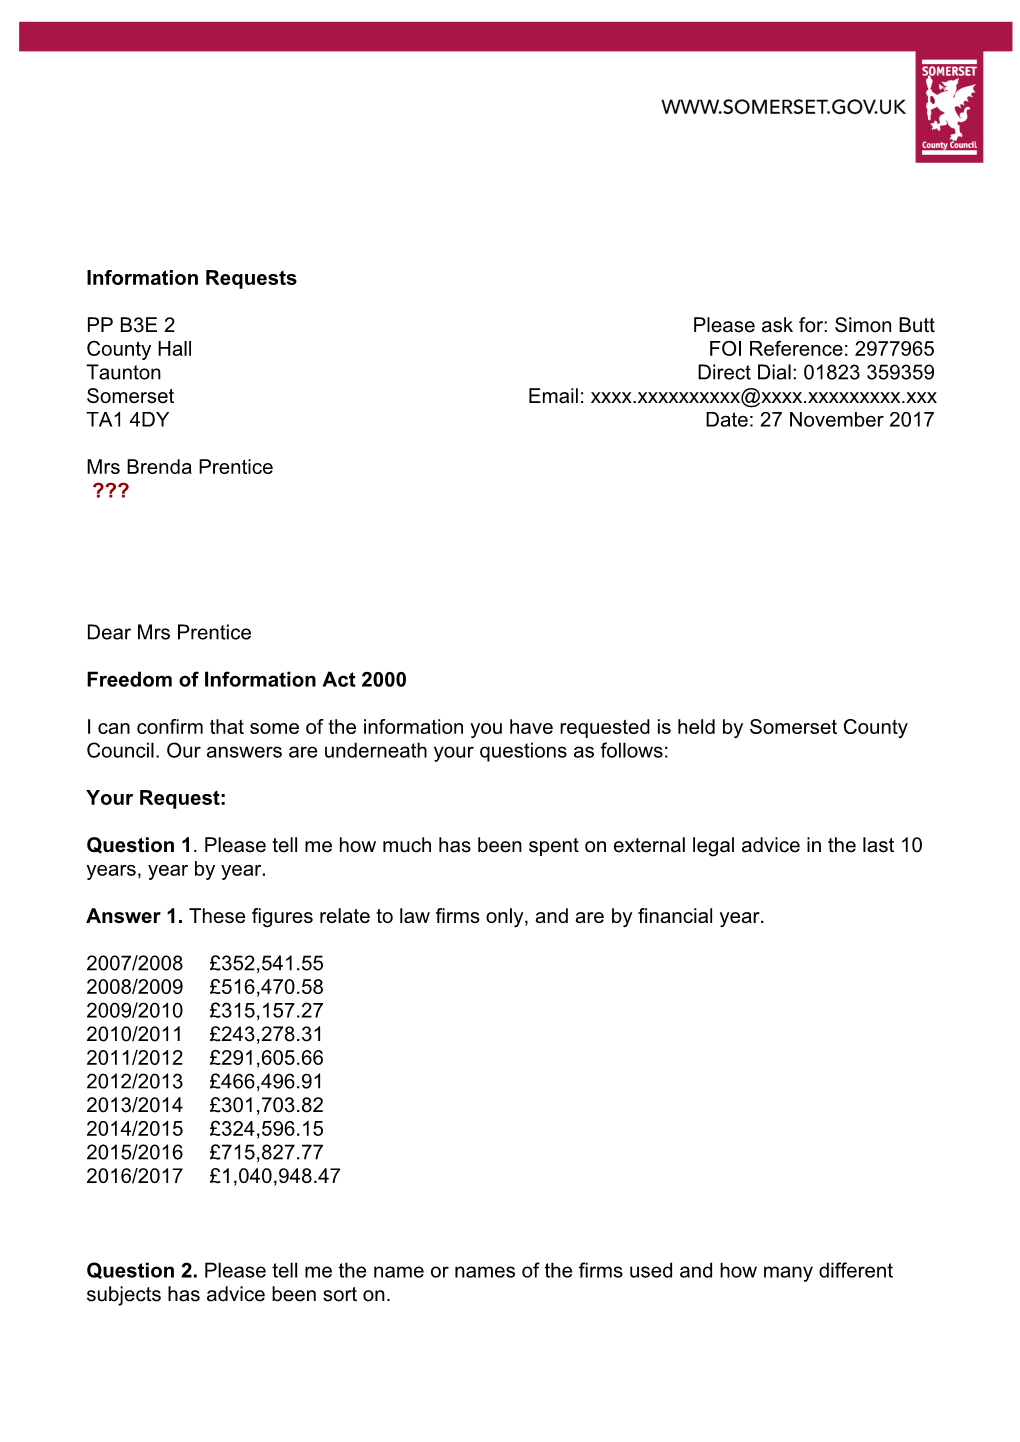 Information Requests PP B3E 2 County Hall Taunton Somerset TA1